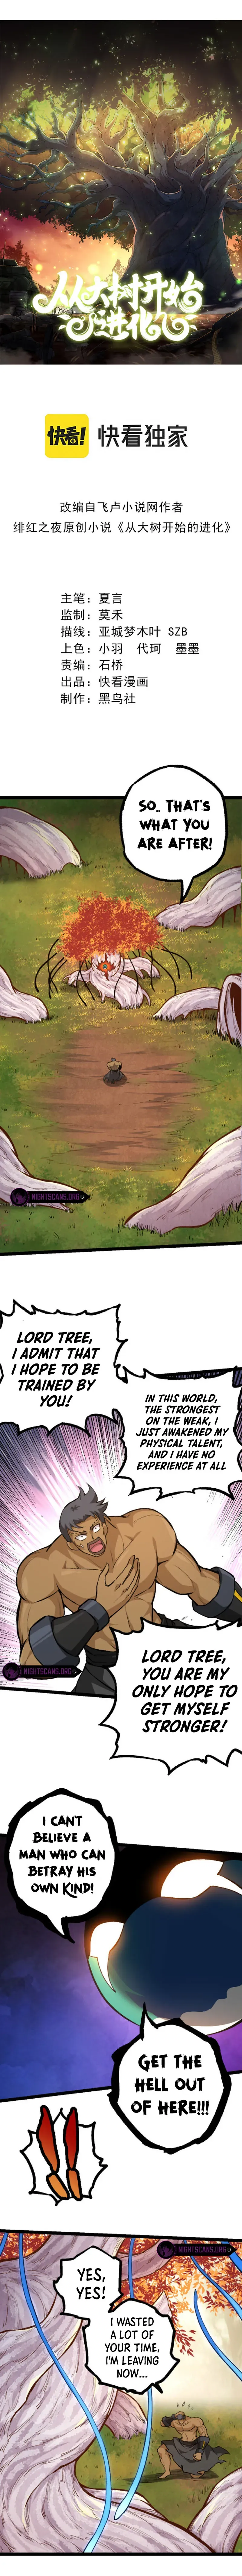 Evolution Begins With A Big Tree Chapter 34 page 2